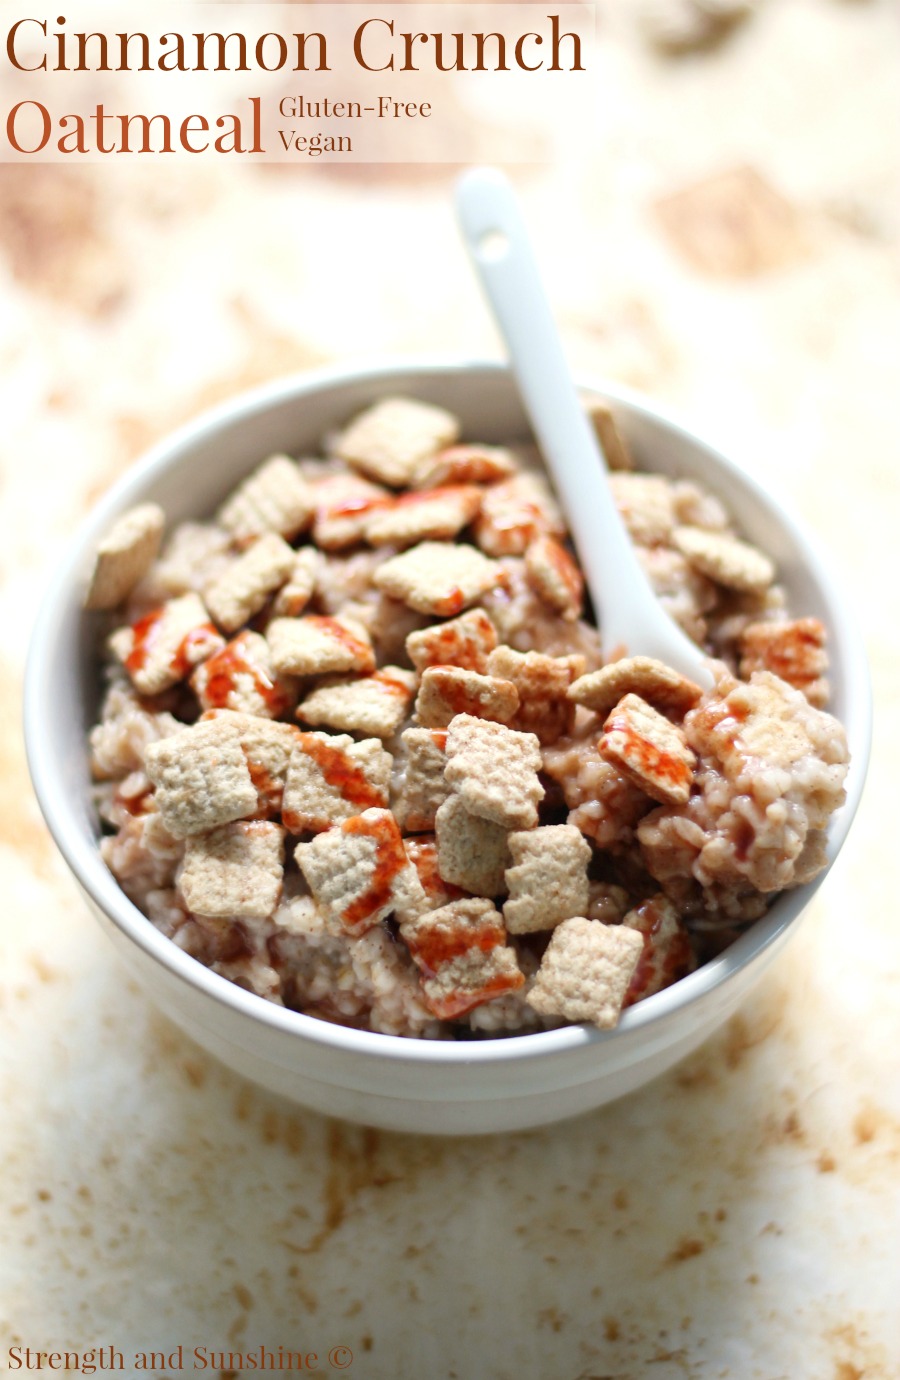 Cinnamon Crunch Oatmeal | Strength and Sunshine @RebeccaGF666 Just the breakfast recipe you need to start your day right! Cinnamon Crunch Oatmeal that tastes decadent, but is healthy, whole grain, and has a fun sweet crunch! This easy single-serve oatmeal is gluten-free, allergy-free, and vegan! ad